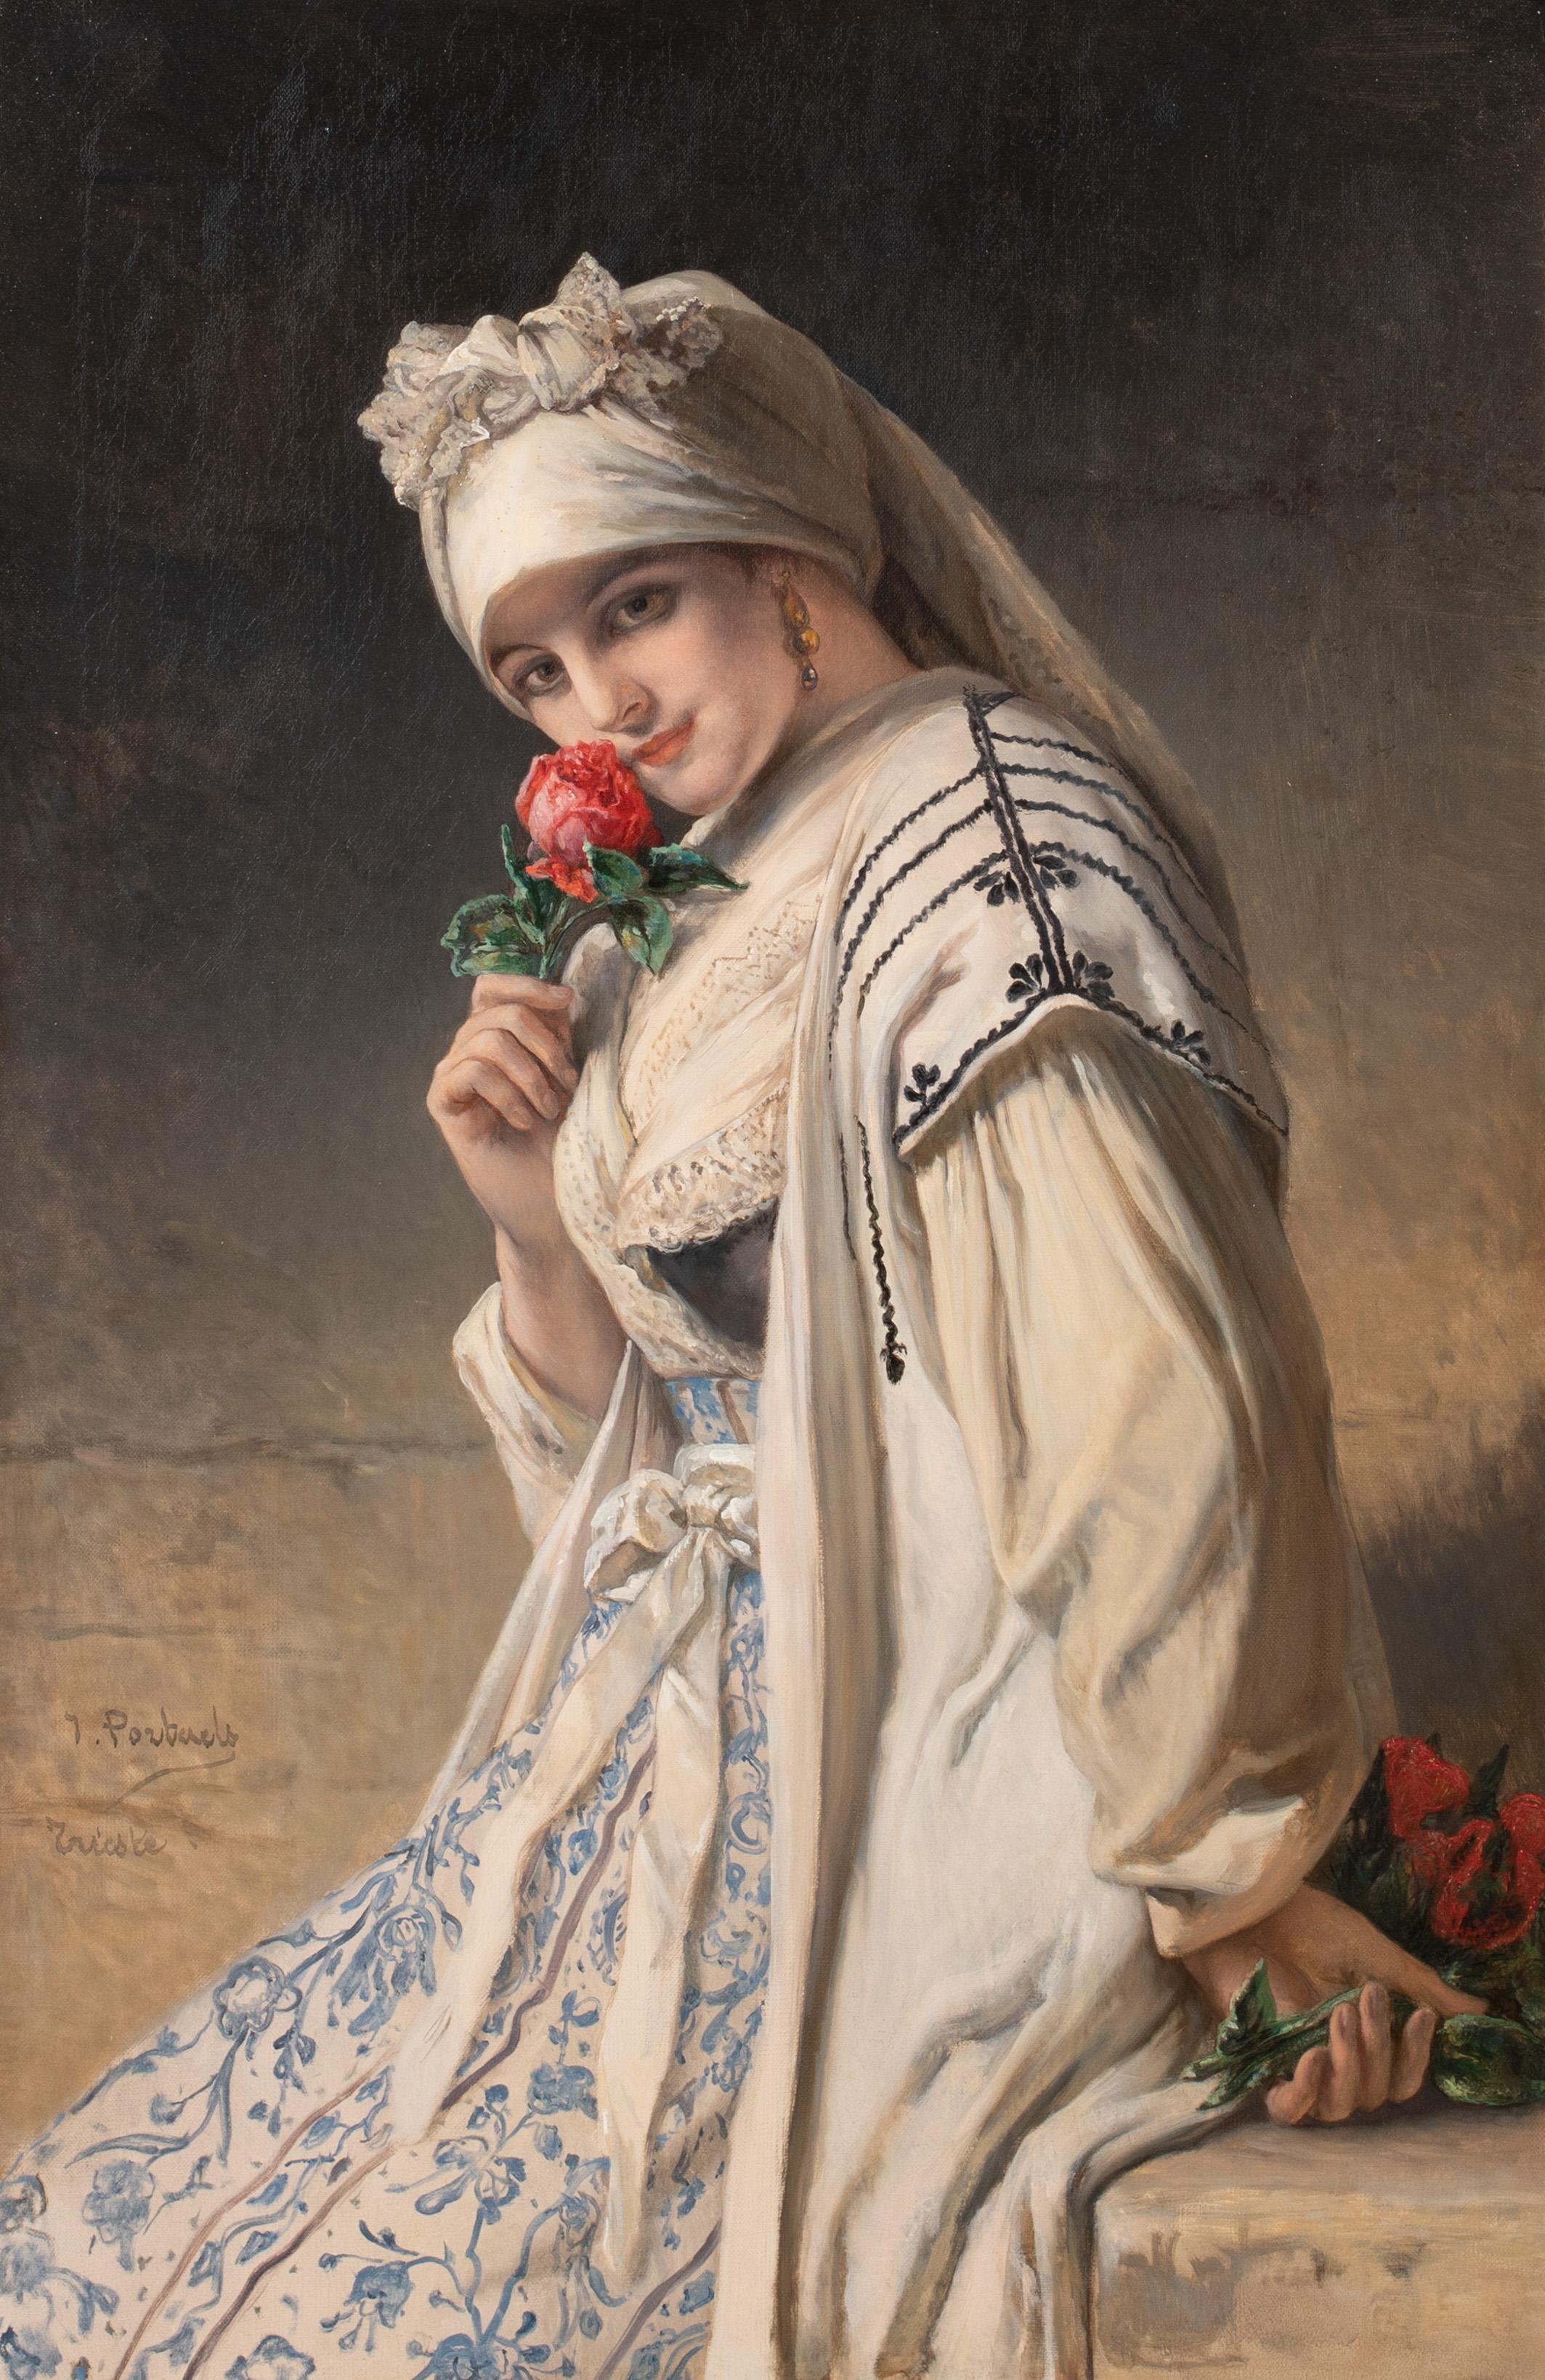 Jean-Fran�_ois Portaels - The Fragrance Of The Rose, 19th century by Jean  Francois Portaels, (1818-1895) For Sale at 1stDibs | jean-françois portaels,  jean françois portaels, garlyn grace child photos